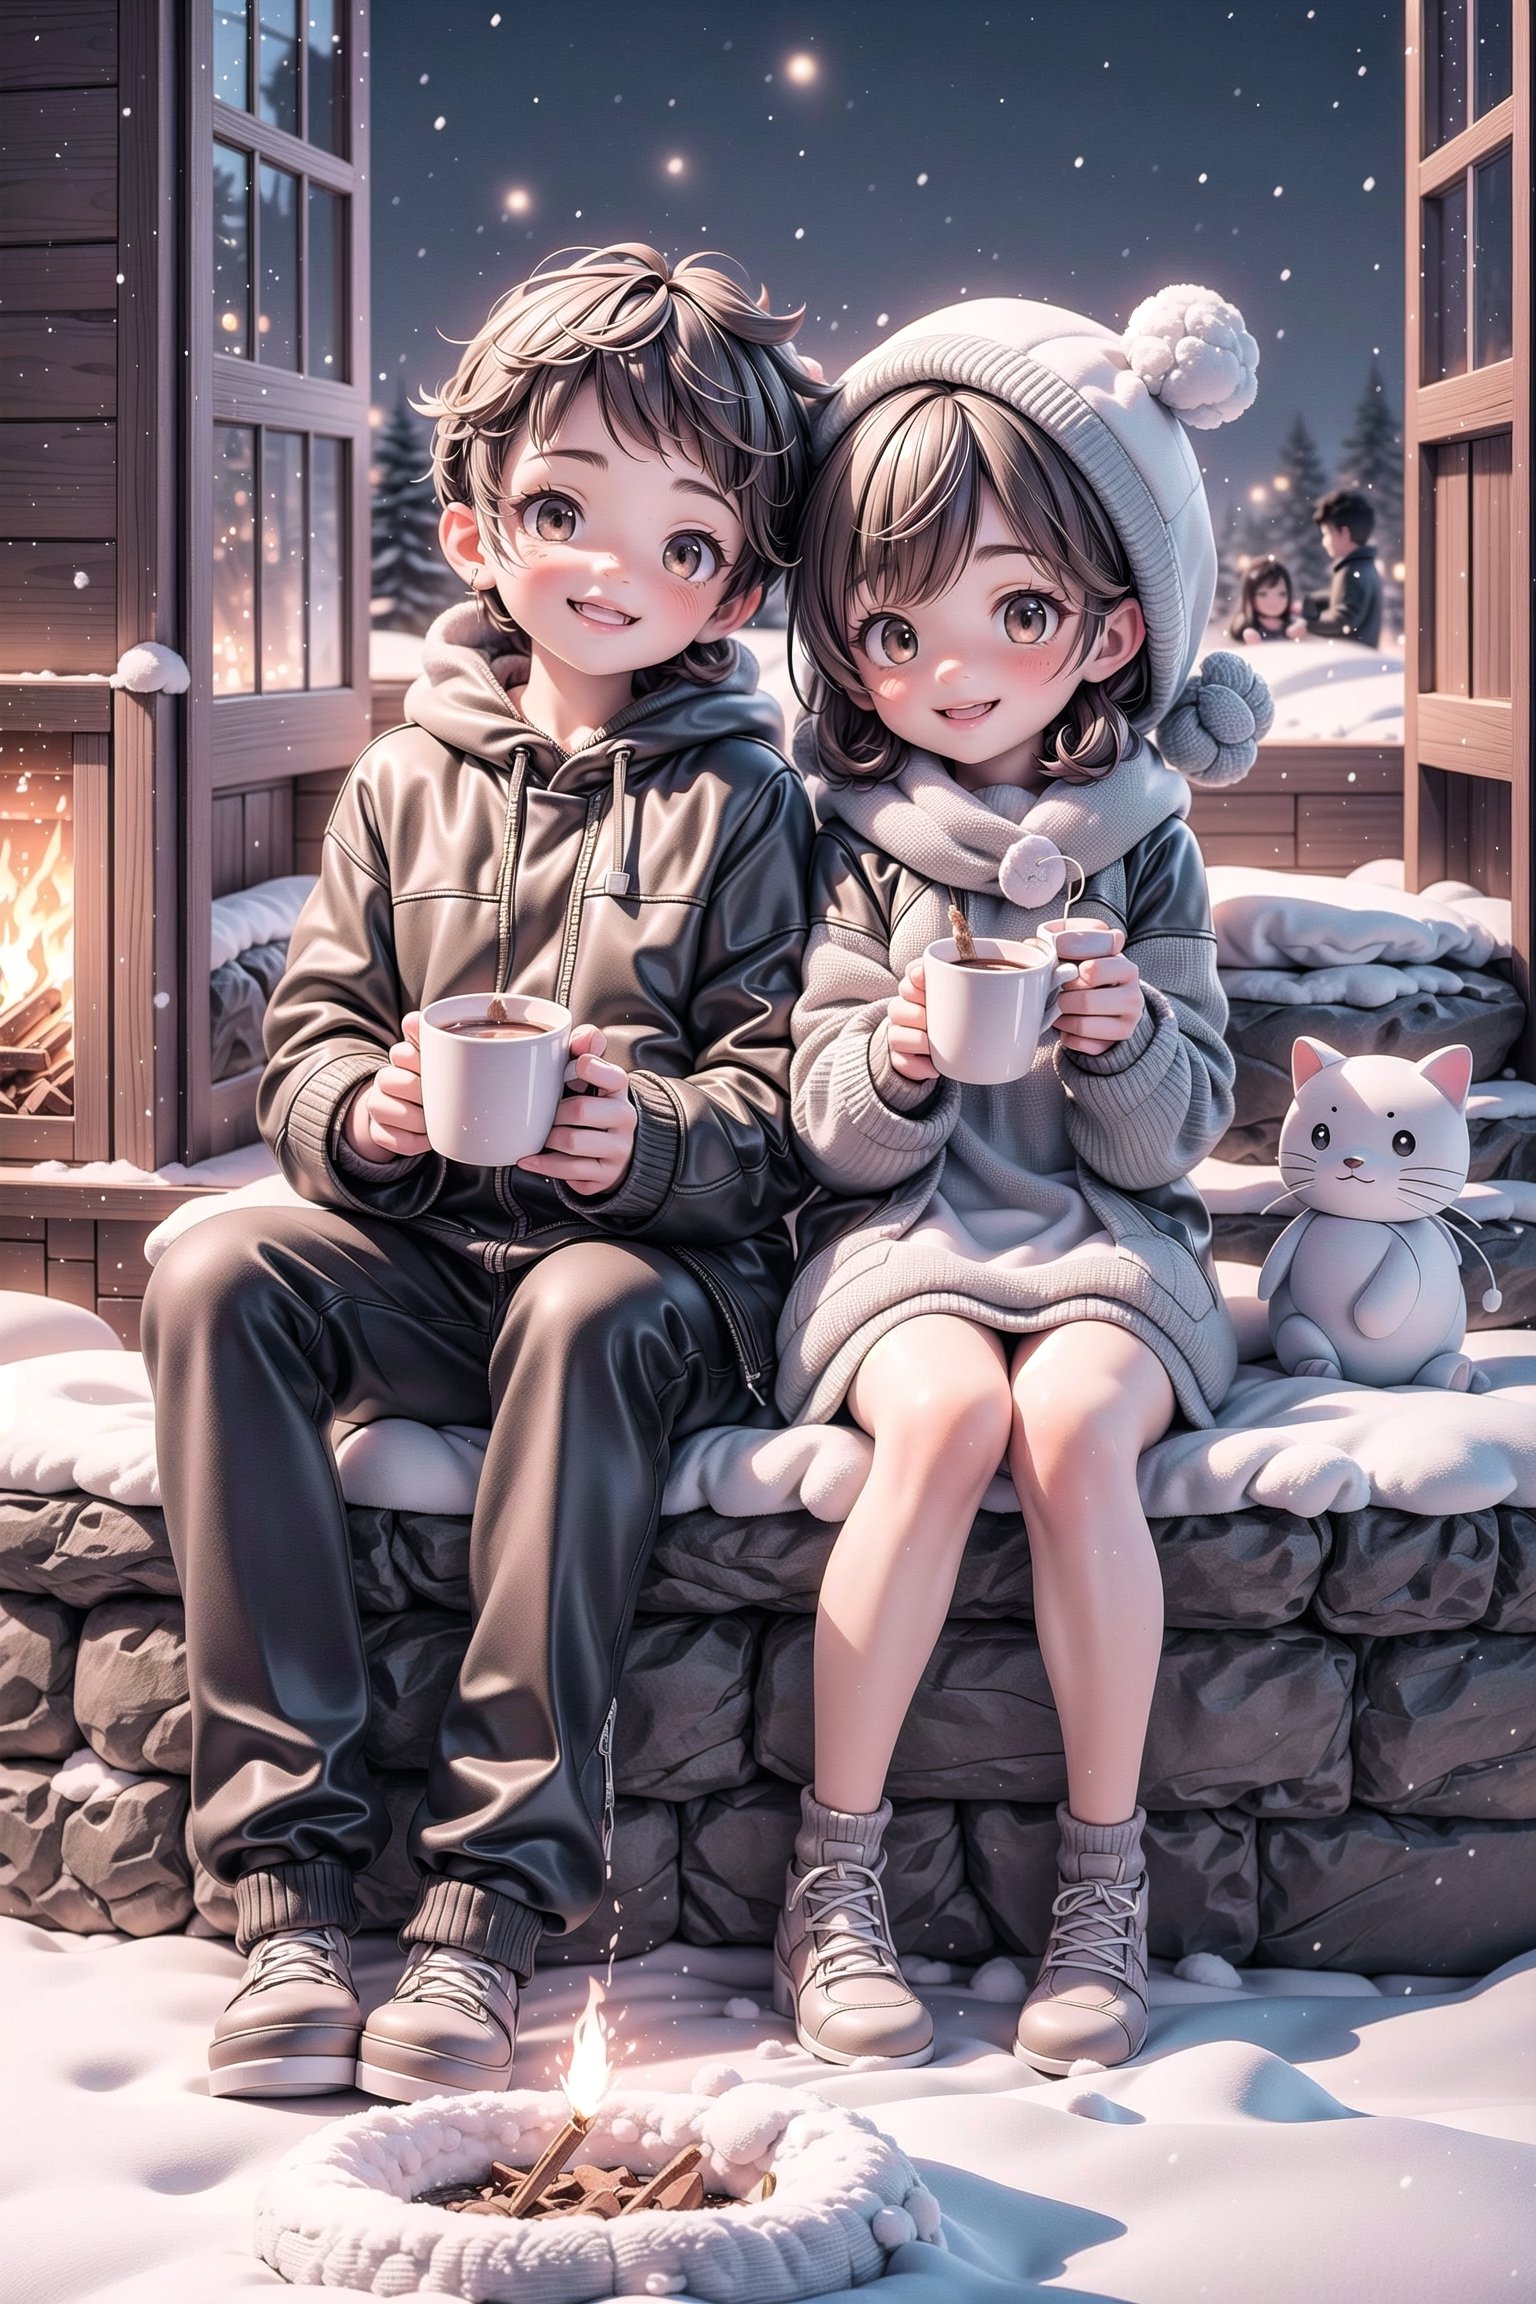 3d,1boy and 1girl, brown eyes,brown hair,korean,Create a cozy image of two kids sitting by a fireplace, sipping hot cocoa, and watching the fireworks through a window, with snow falling gently outside, happy, smiling, eye contact viewer,